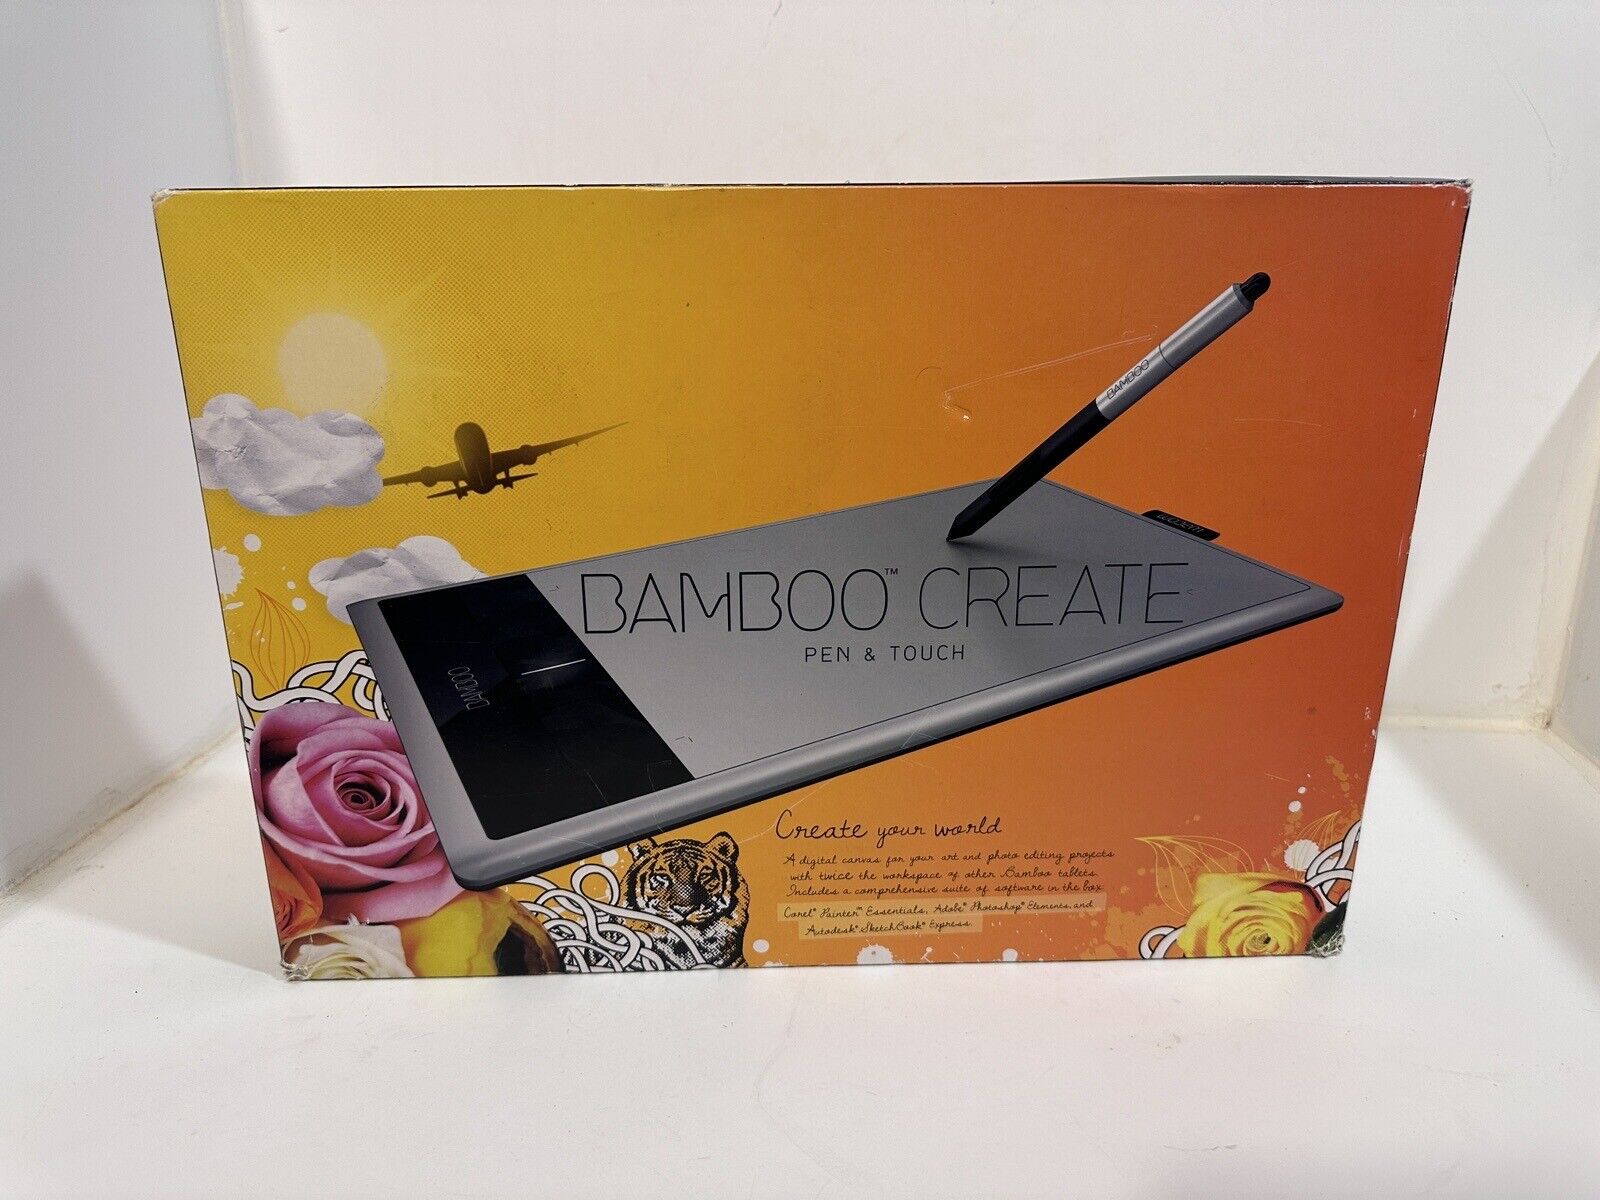 Wacom Bamboo Create Pen & Touch Drawing Graphics Tablet